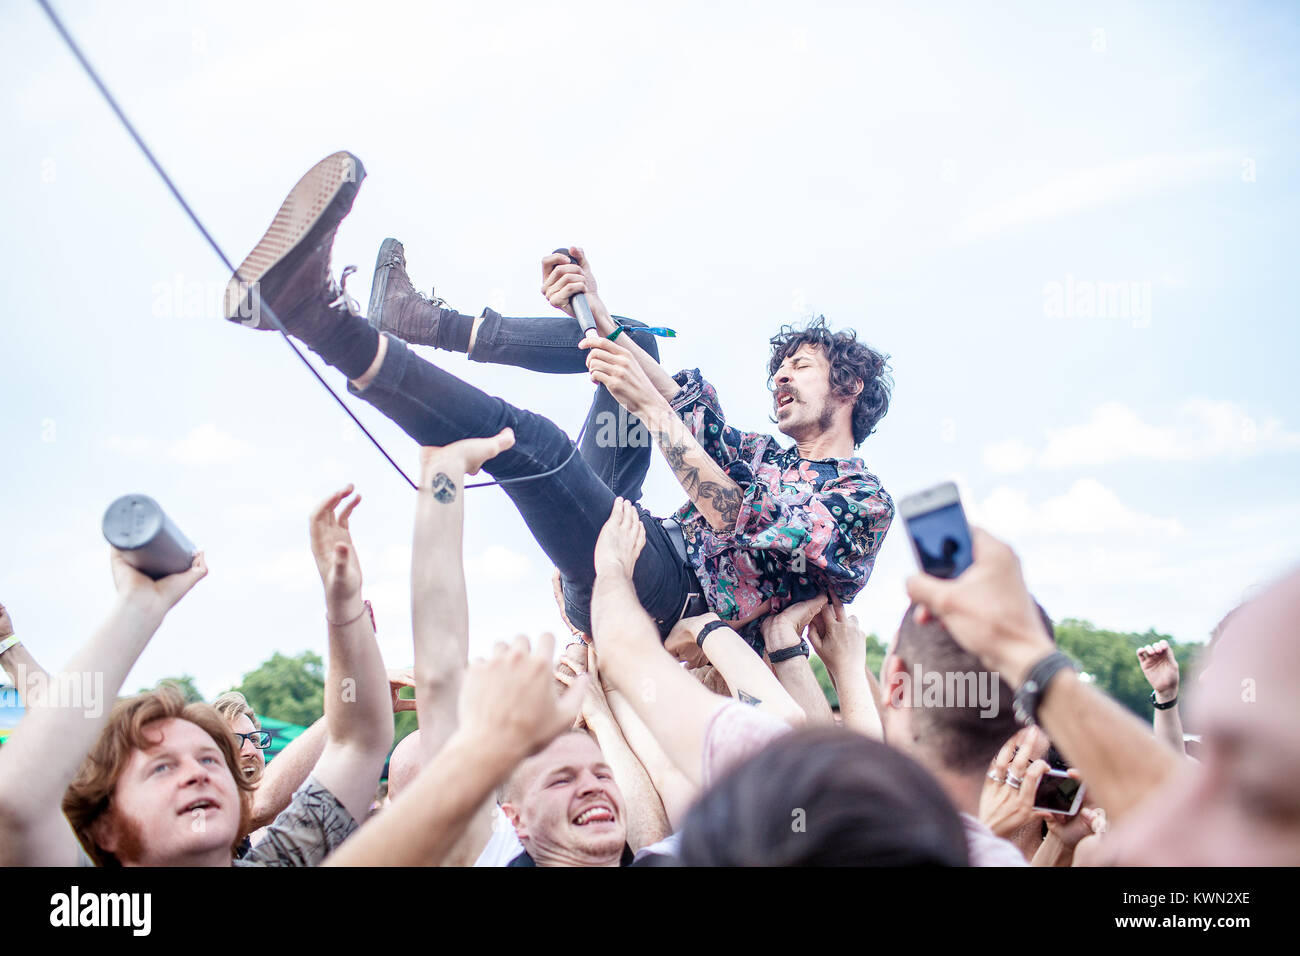 The English hard rock band Turbowolf performs a live concert at the Summer Stage at the Barclaycard British Summer Time festival 2014 at Hyde Park, London. Here vocalist Chris Georgiadis is crowd surfing at the gig. UK 04.07.2014. Stock Photo